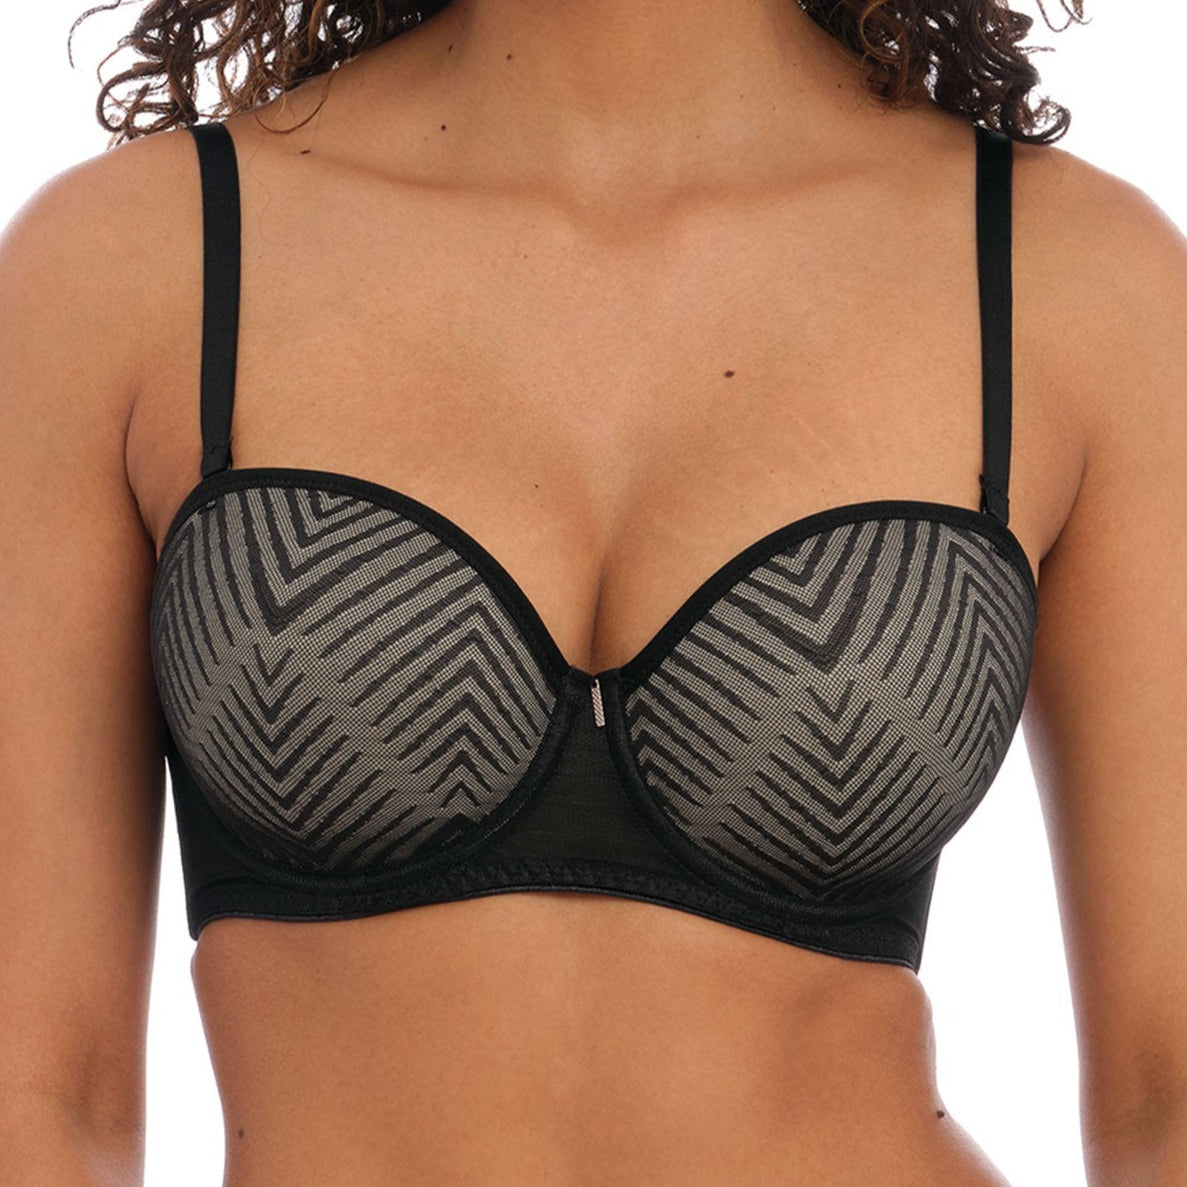 Tailored Moulded Strapless Bra - AA401109 - Black